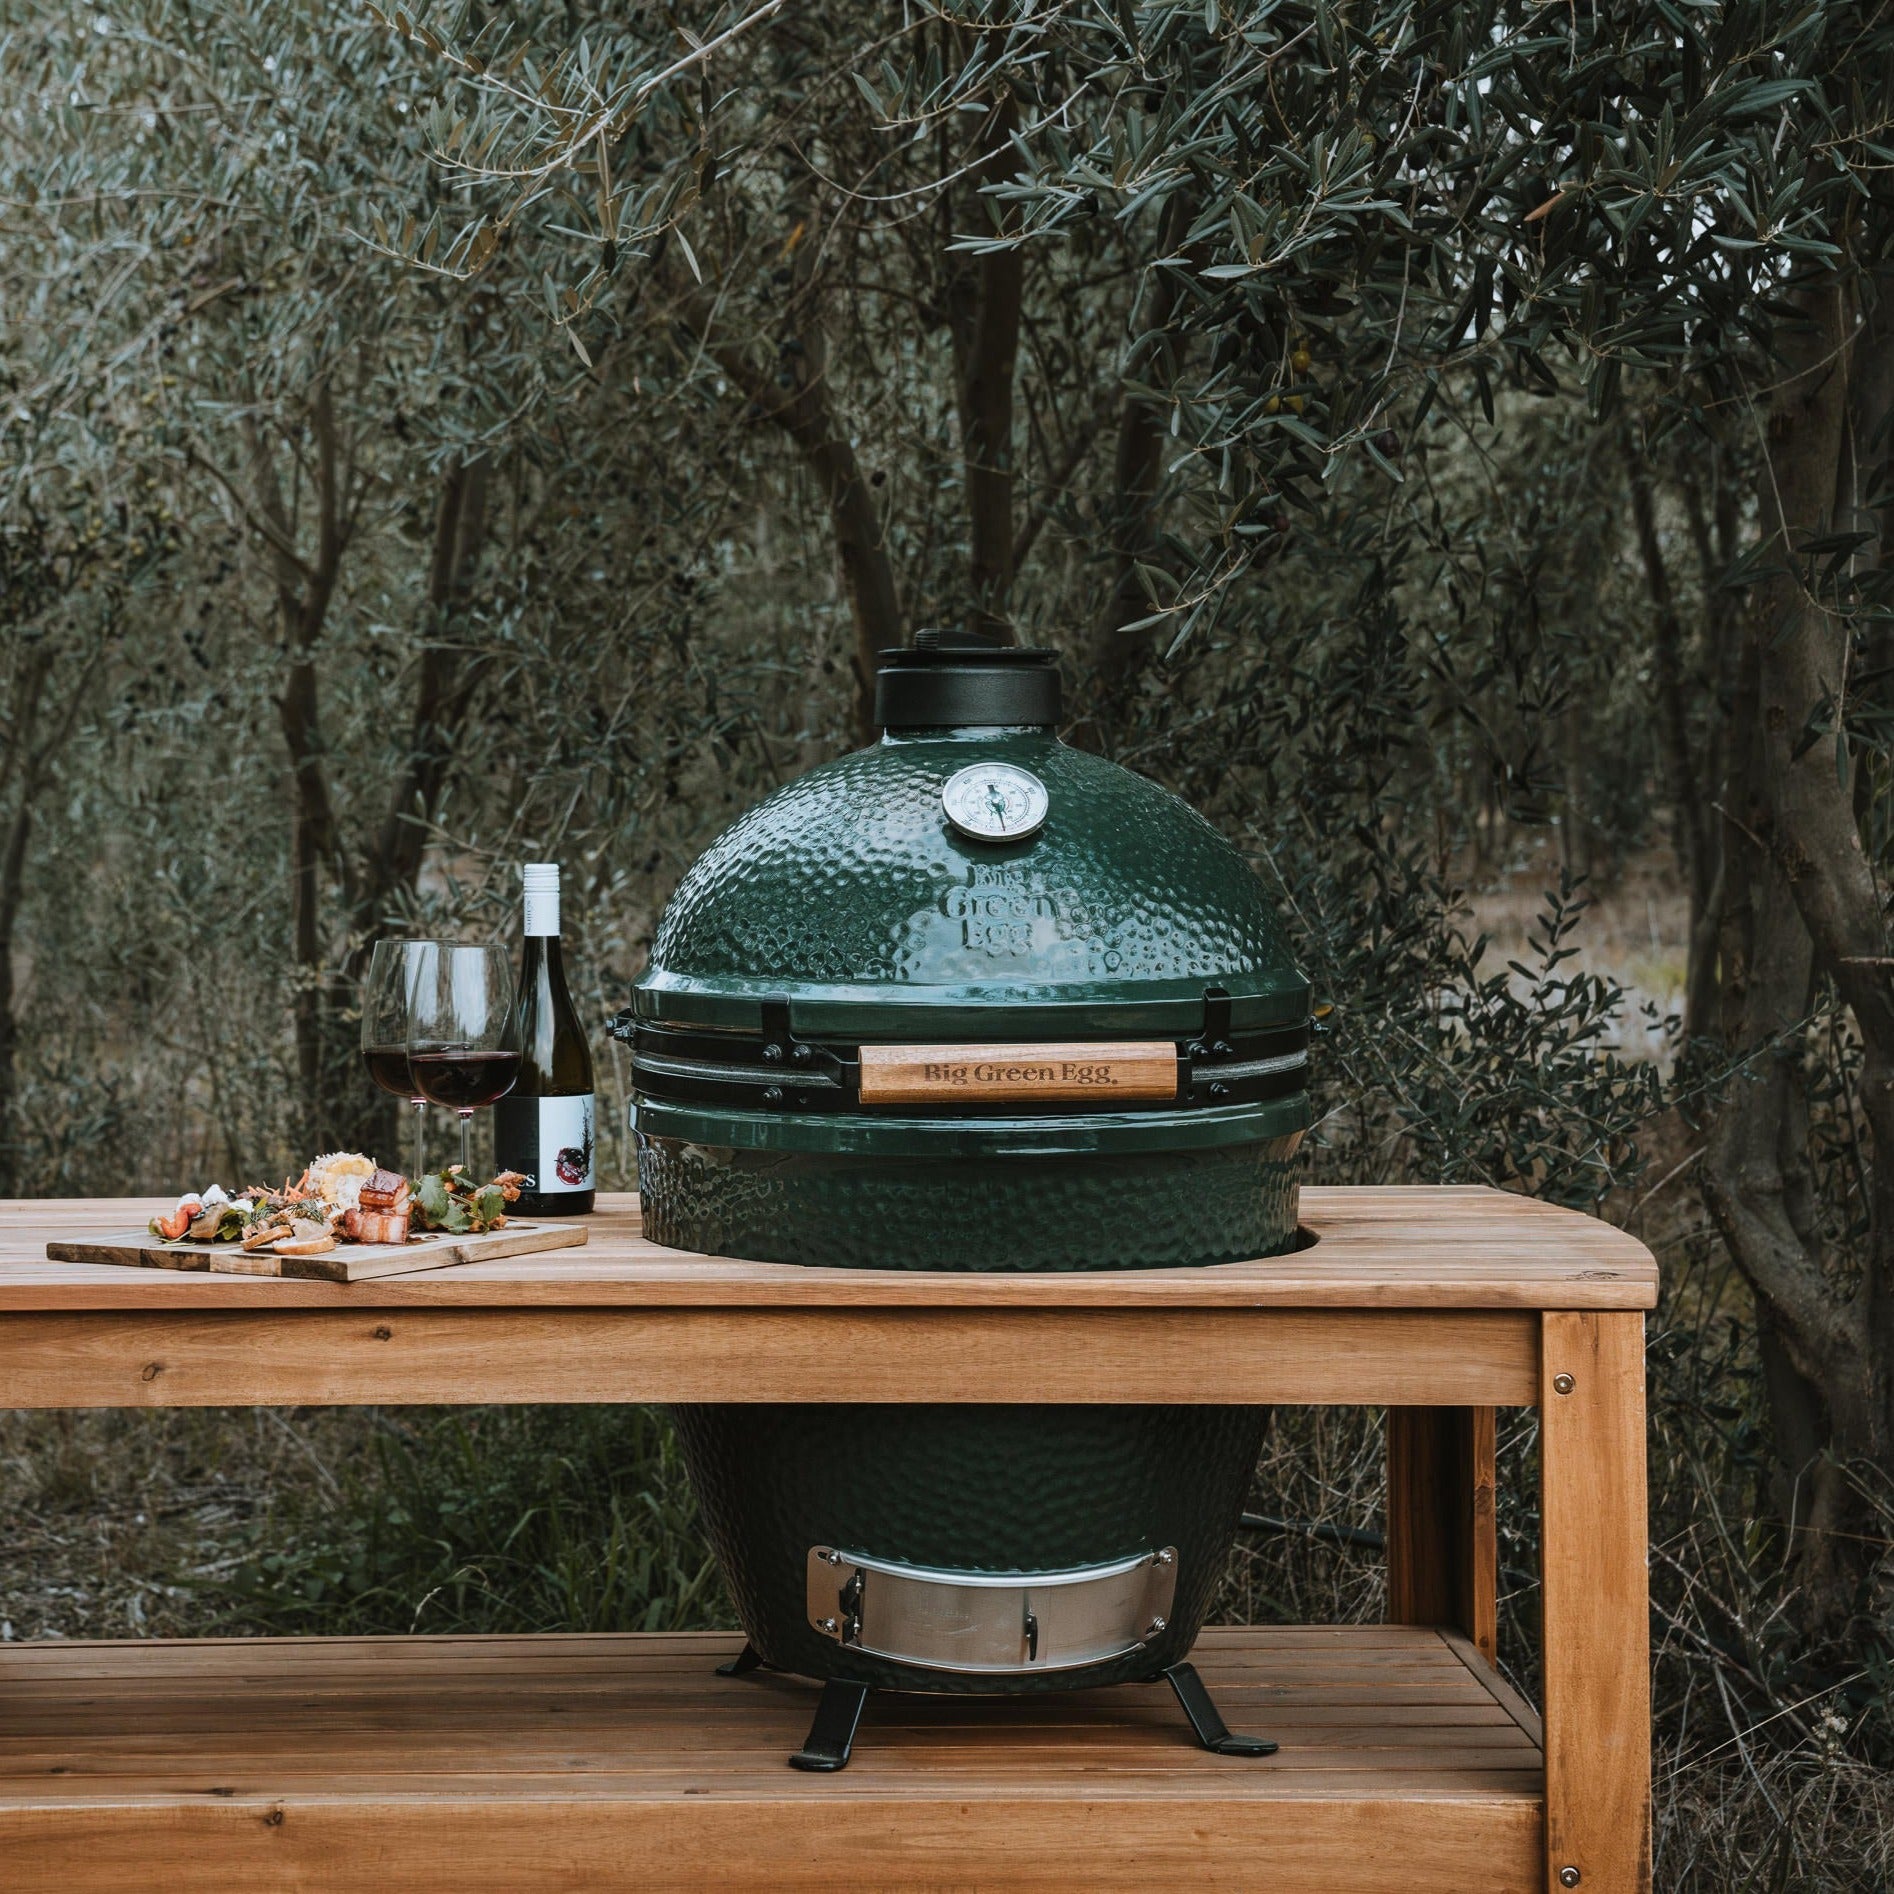 Big Green Egg Large Acacia Table Package